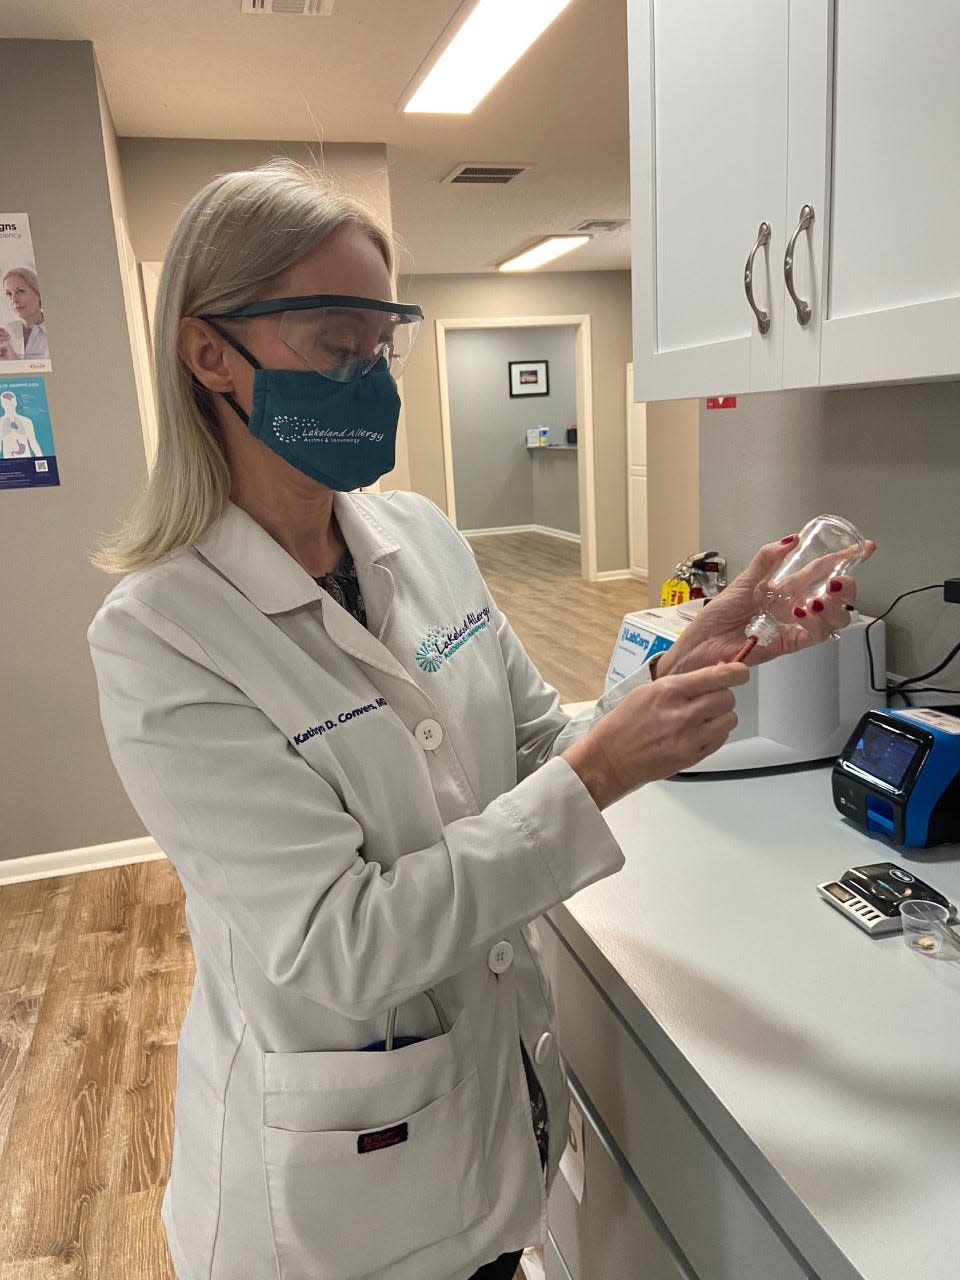 Dr. Kathryn Convers, a Lakeland allergy specialist who provides oral immunotherapy for severe food allergies, demonstrates how she would use a clinic-prepared solution in starting to desensitize patients to foods to which they are allergic.